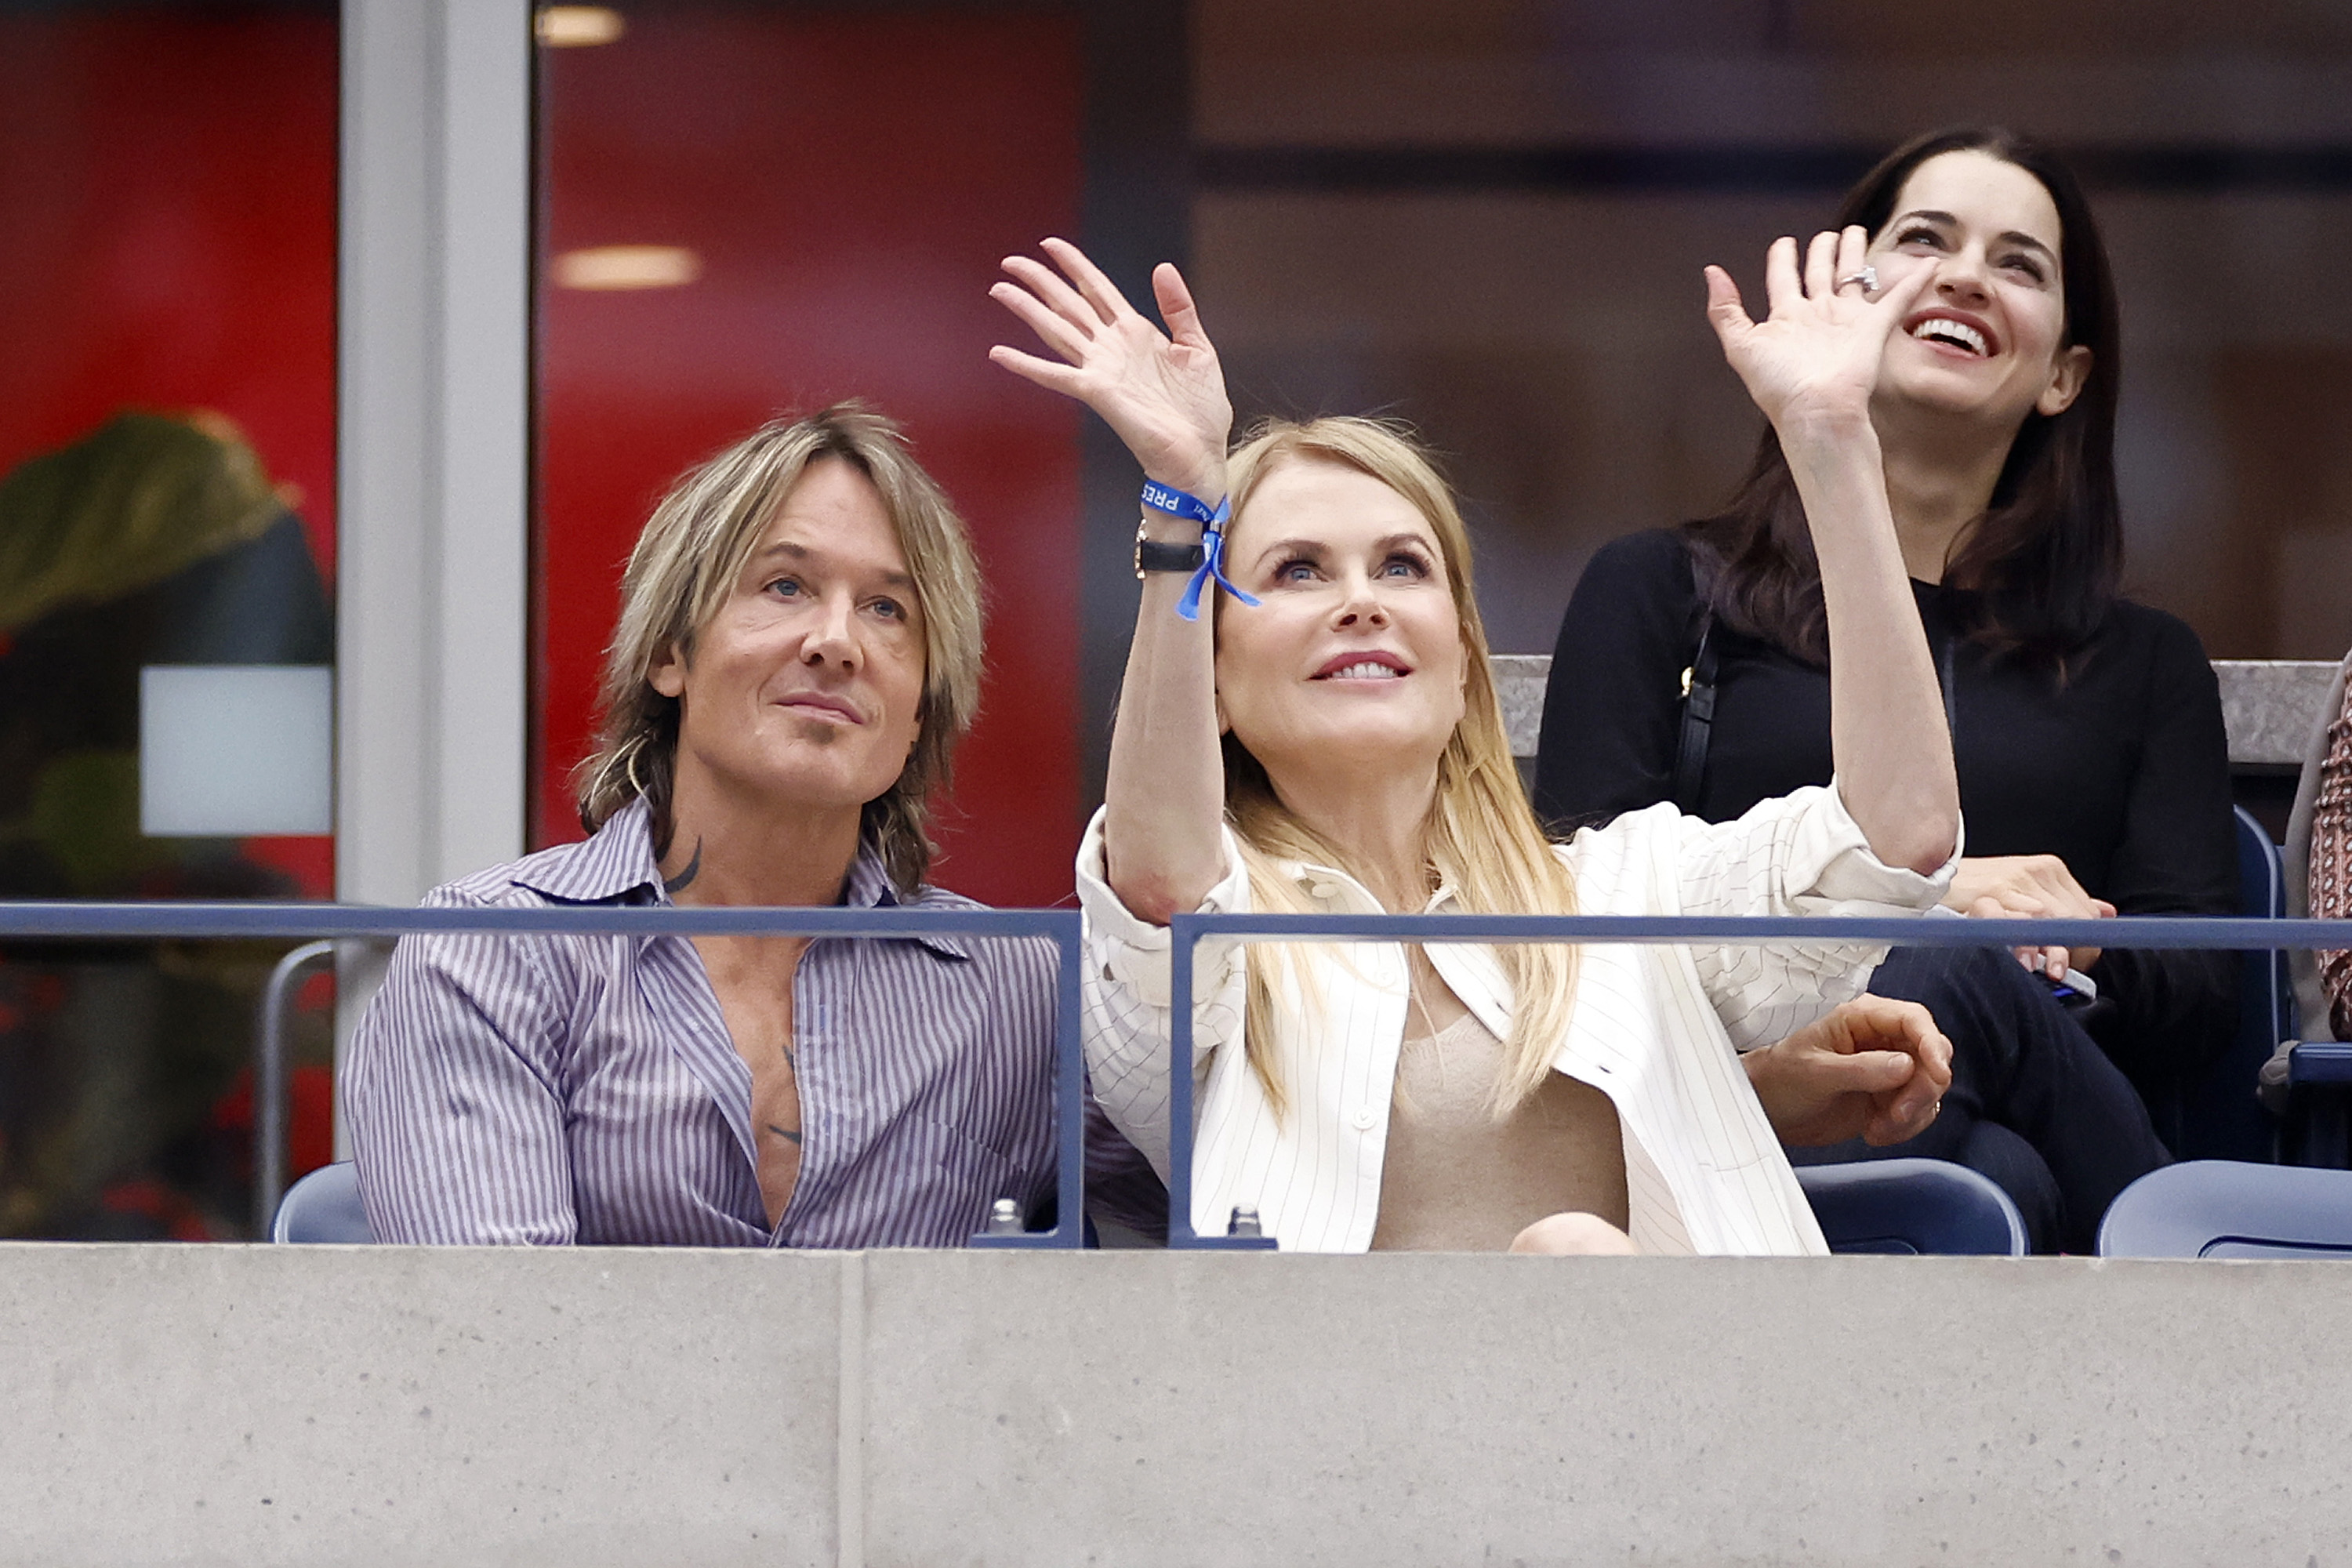 Keith Urban and Nicole Kidman look on during the Men's Singles Final match between Novak Djokovic and Daniil Medvedev at the 2023 US Open at the USTA Billie Jean King National Tennis Center, on September 10, 2023, in Queens, New York City.| Source: Getty Images